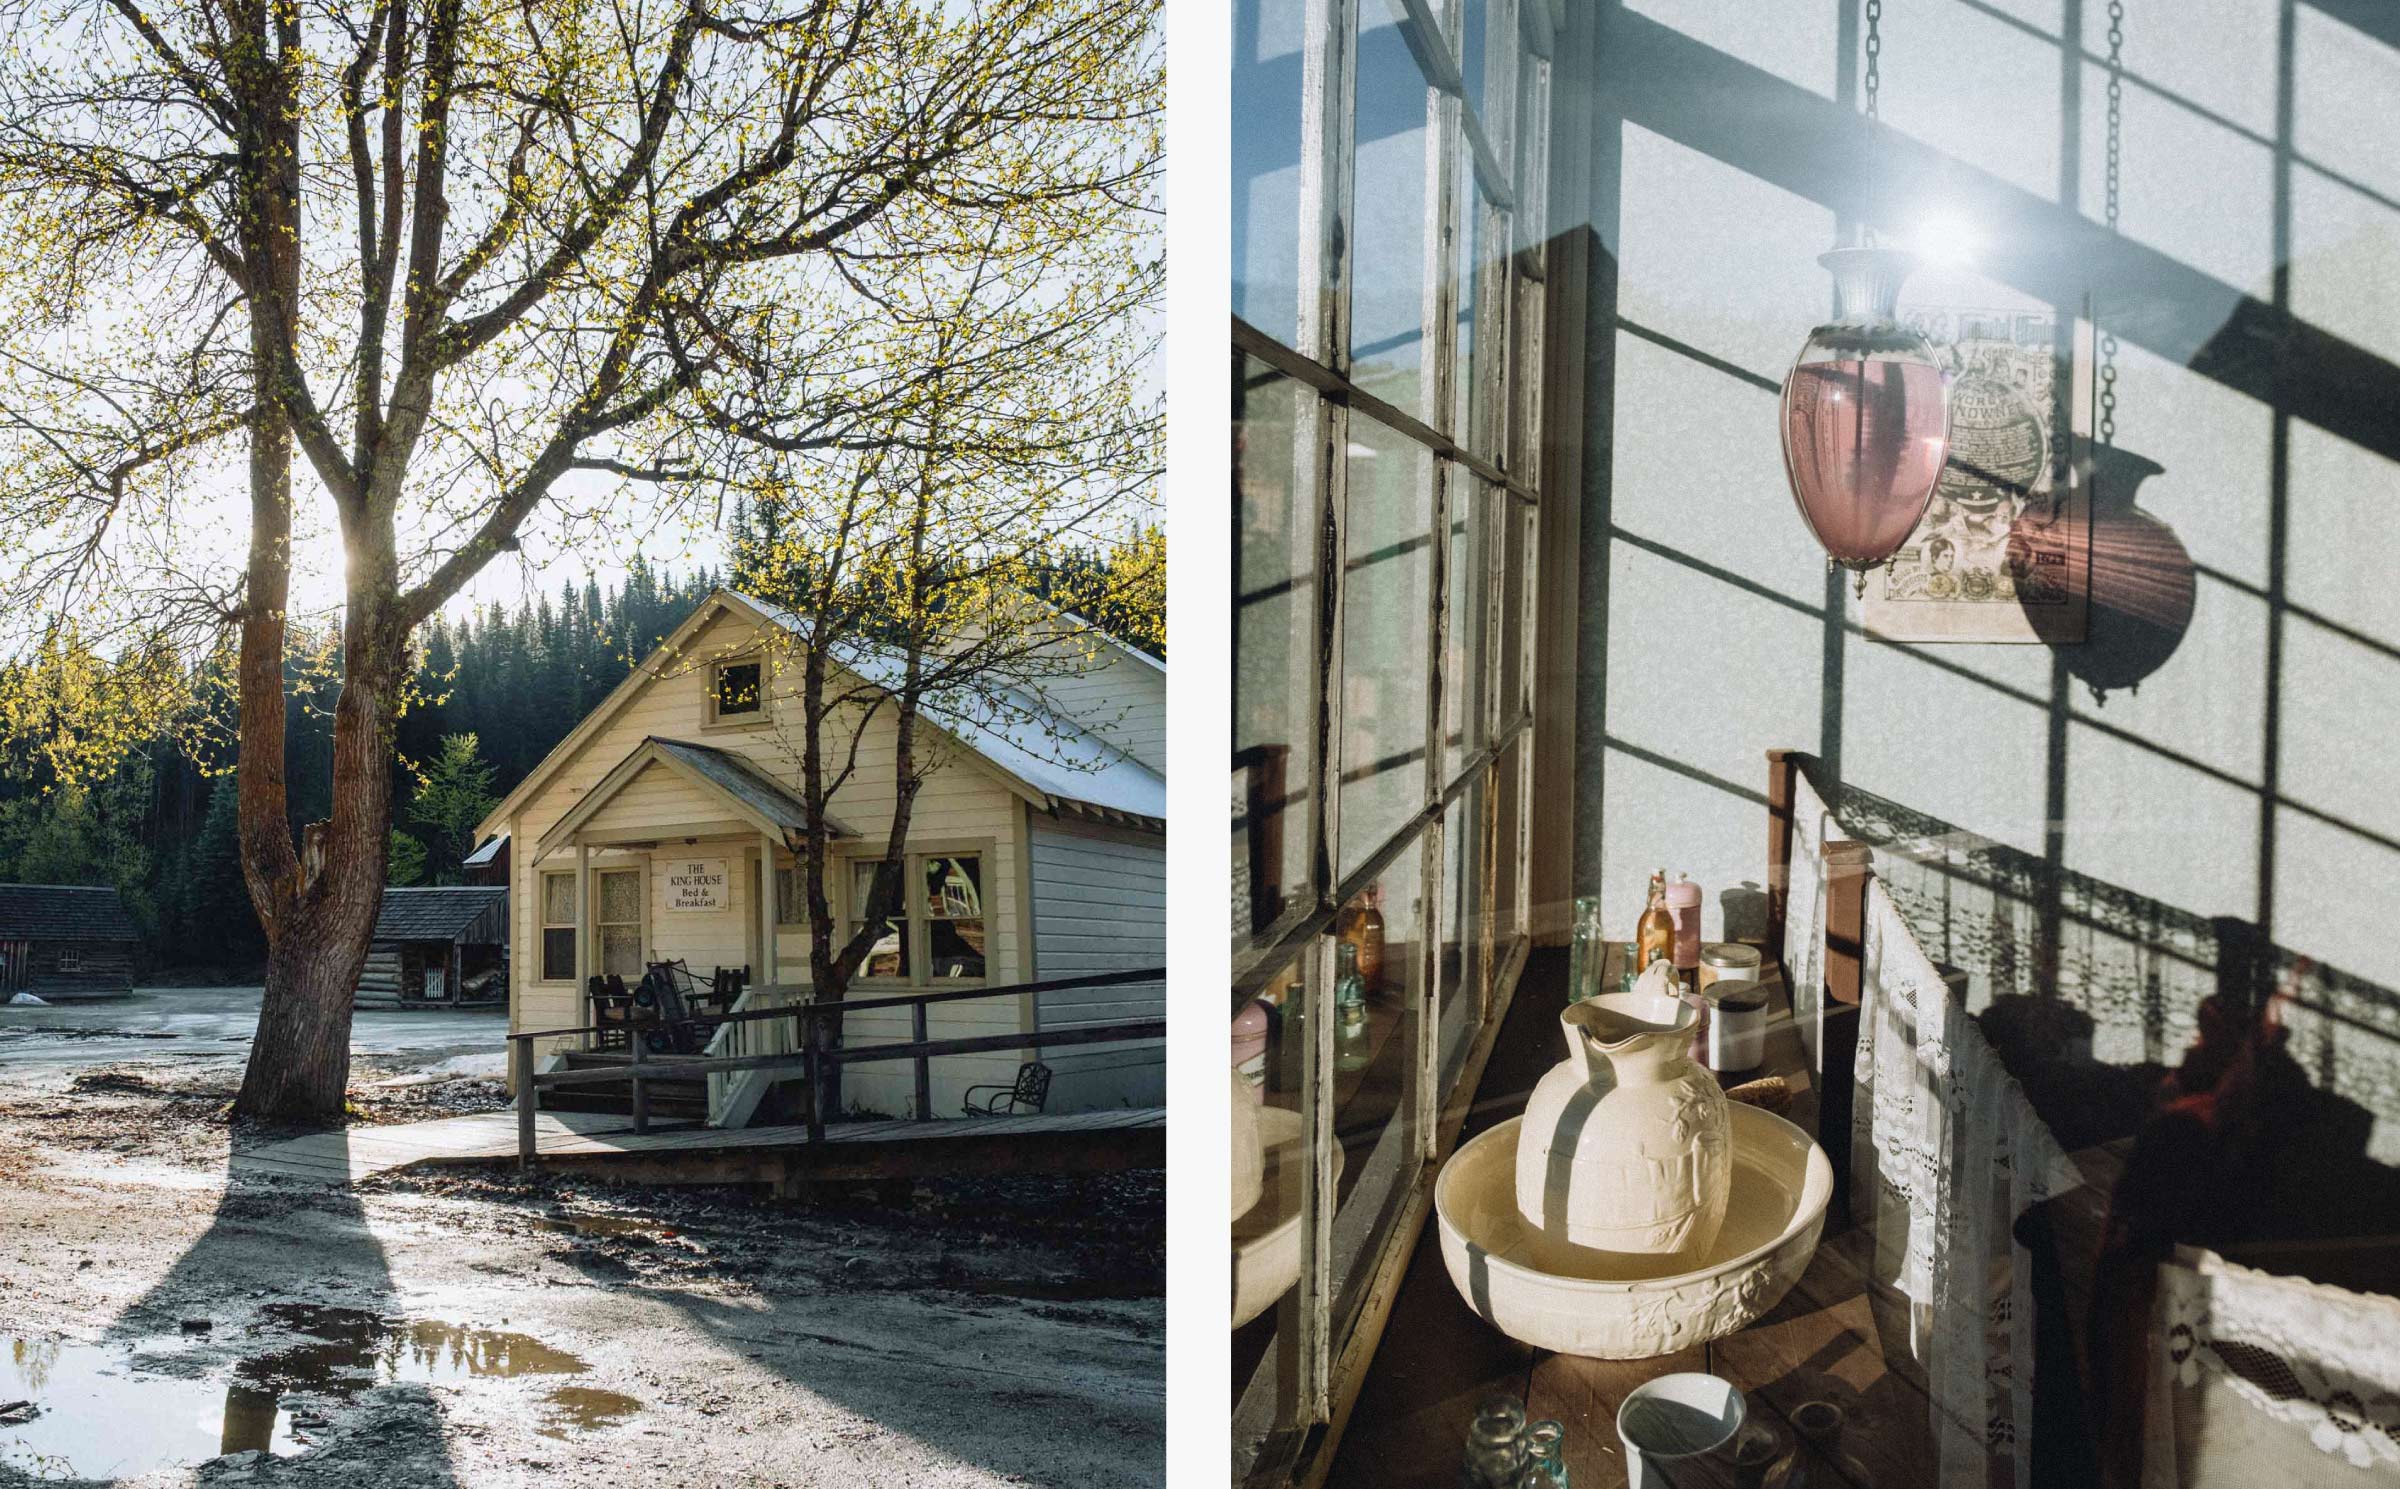 Morning scenes in the little historic gold rush town of Barkerville, BC